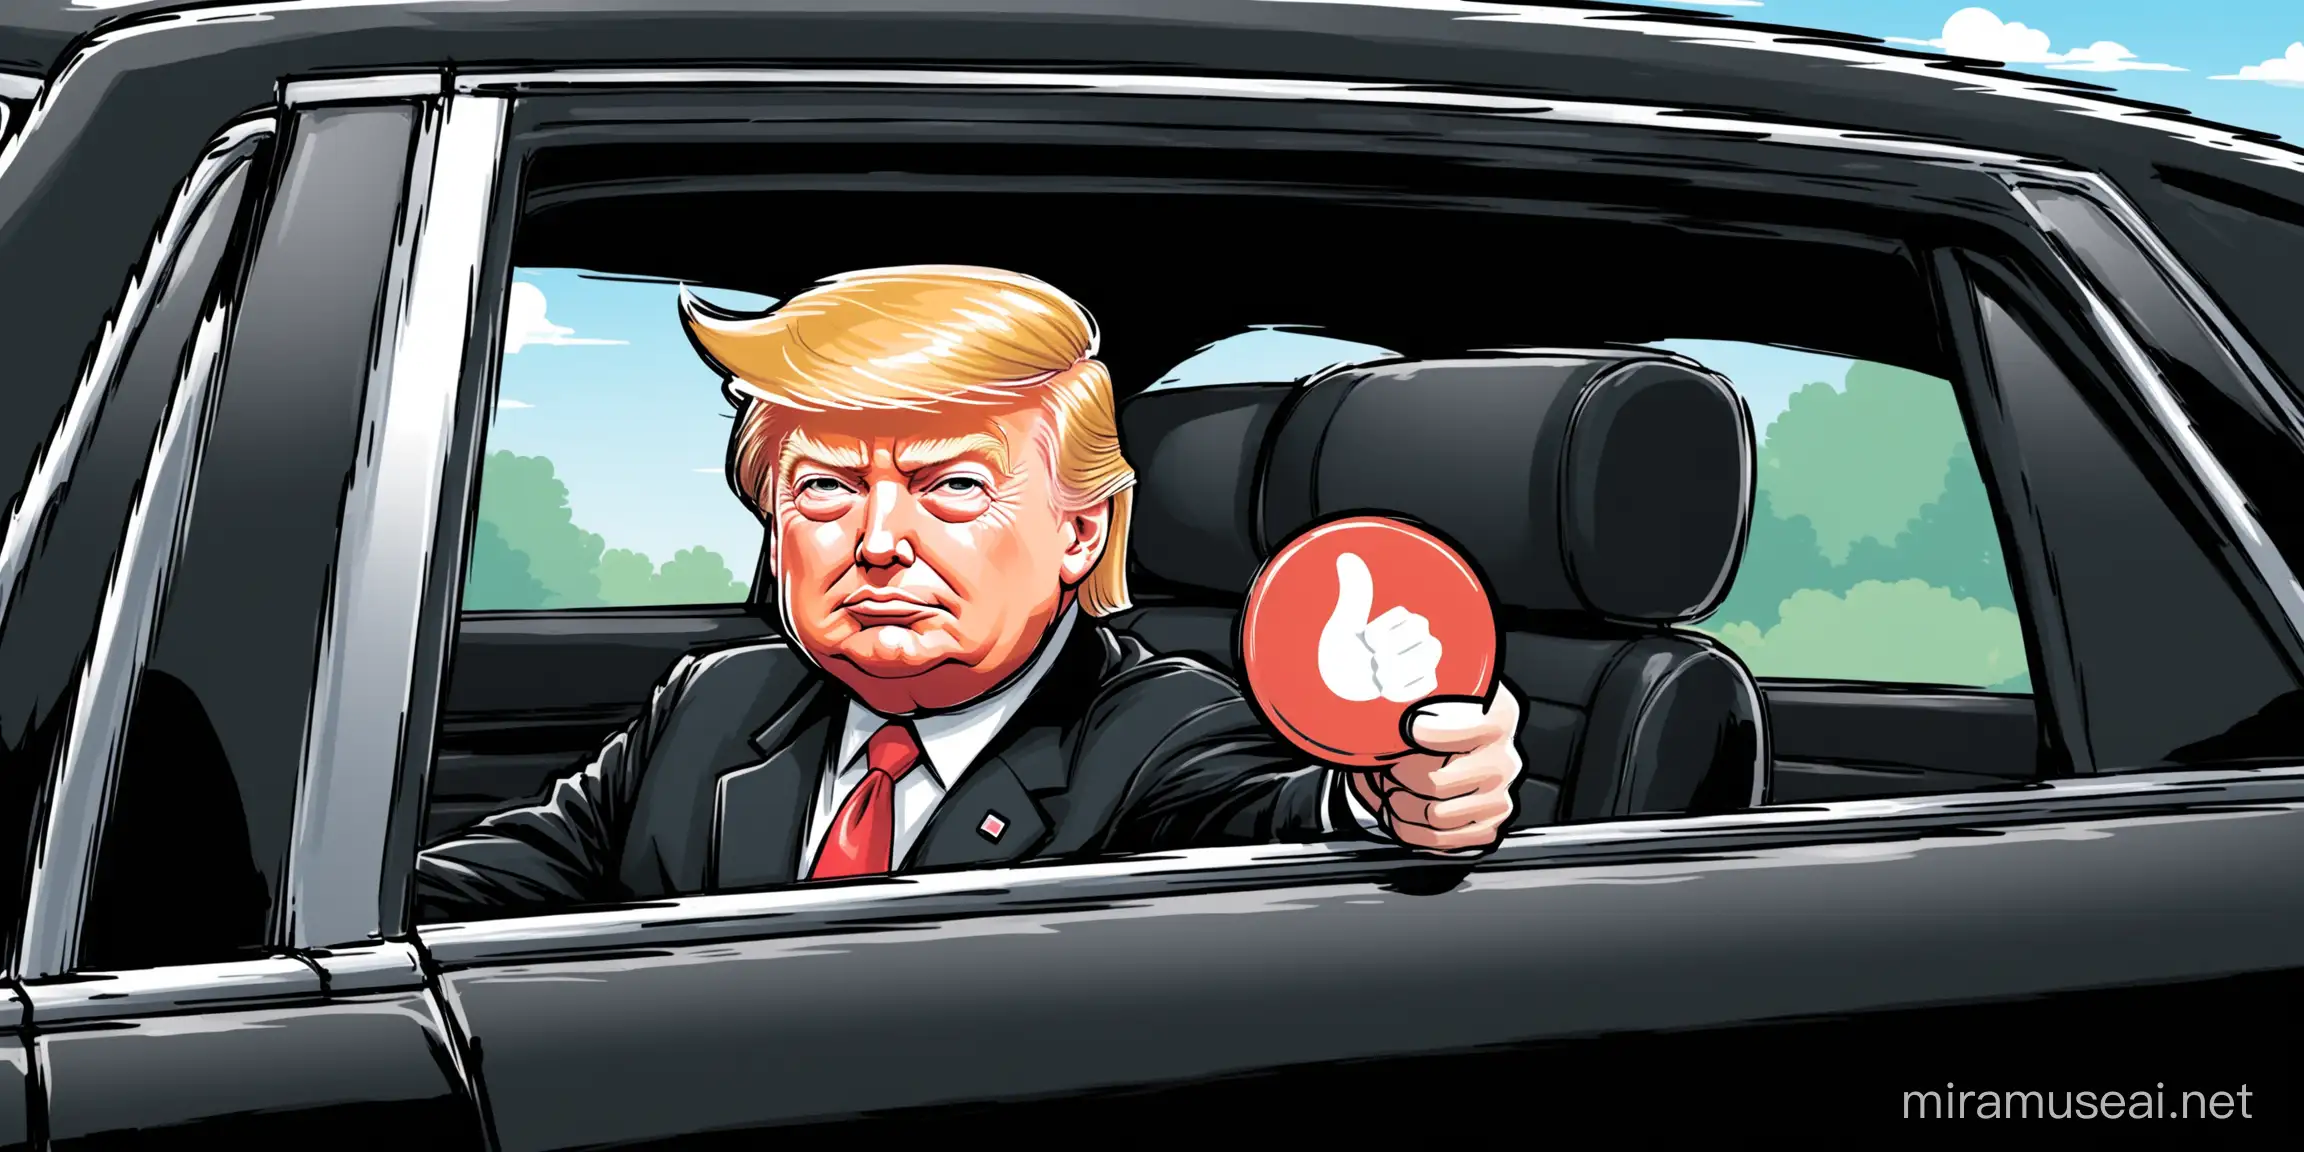 Create a photo of President Donald Trump sitting in the passenger seat of a black car looking out the window and holding a like button with one hand, in a cute cartoon style